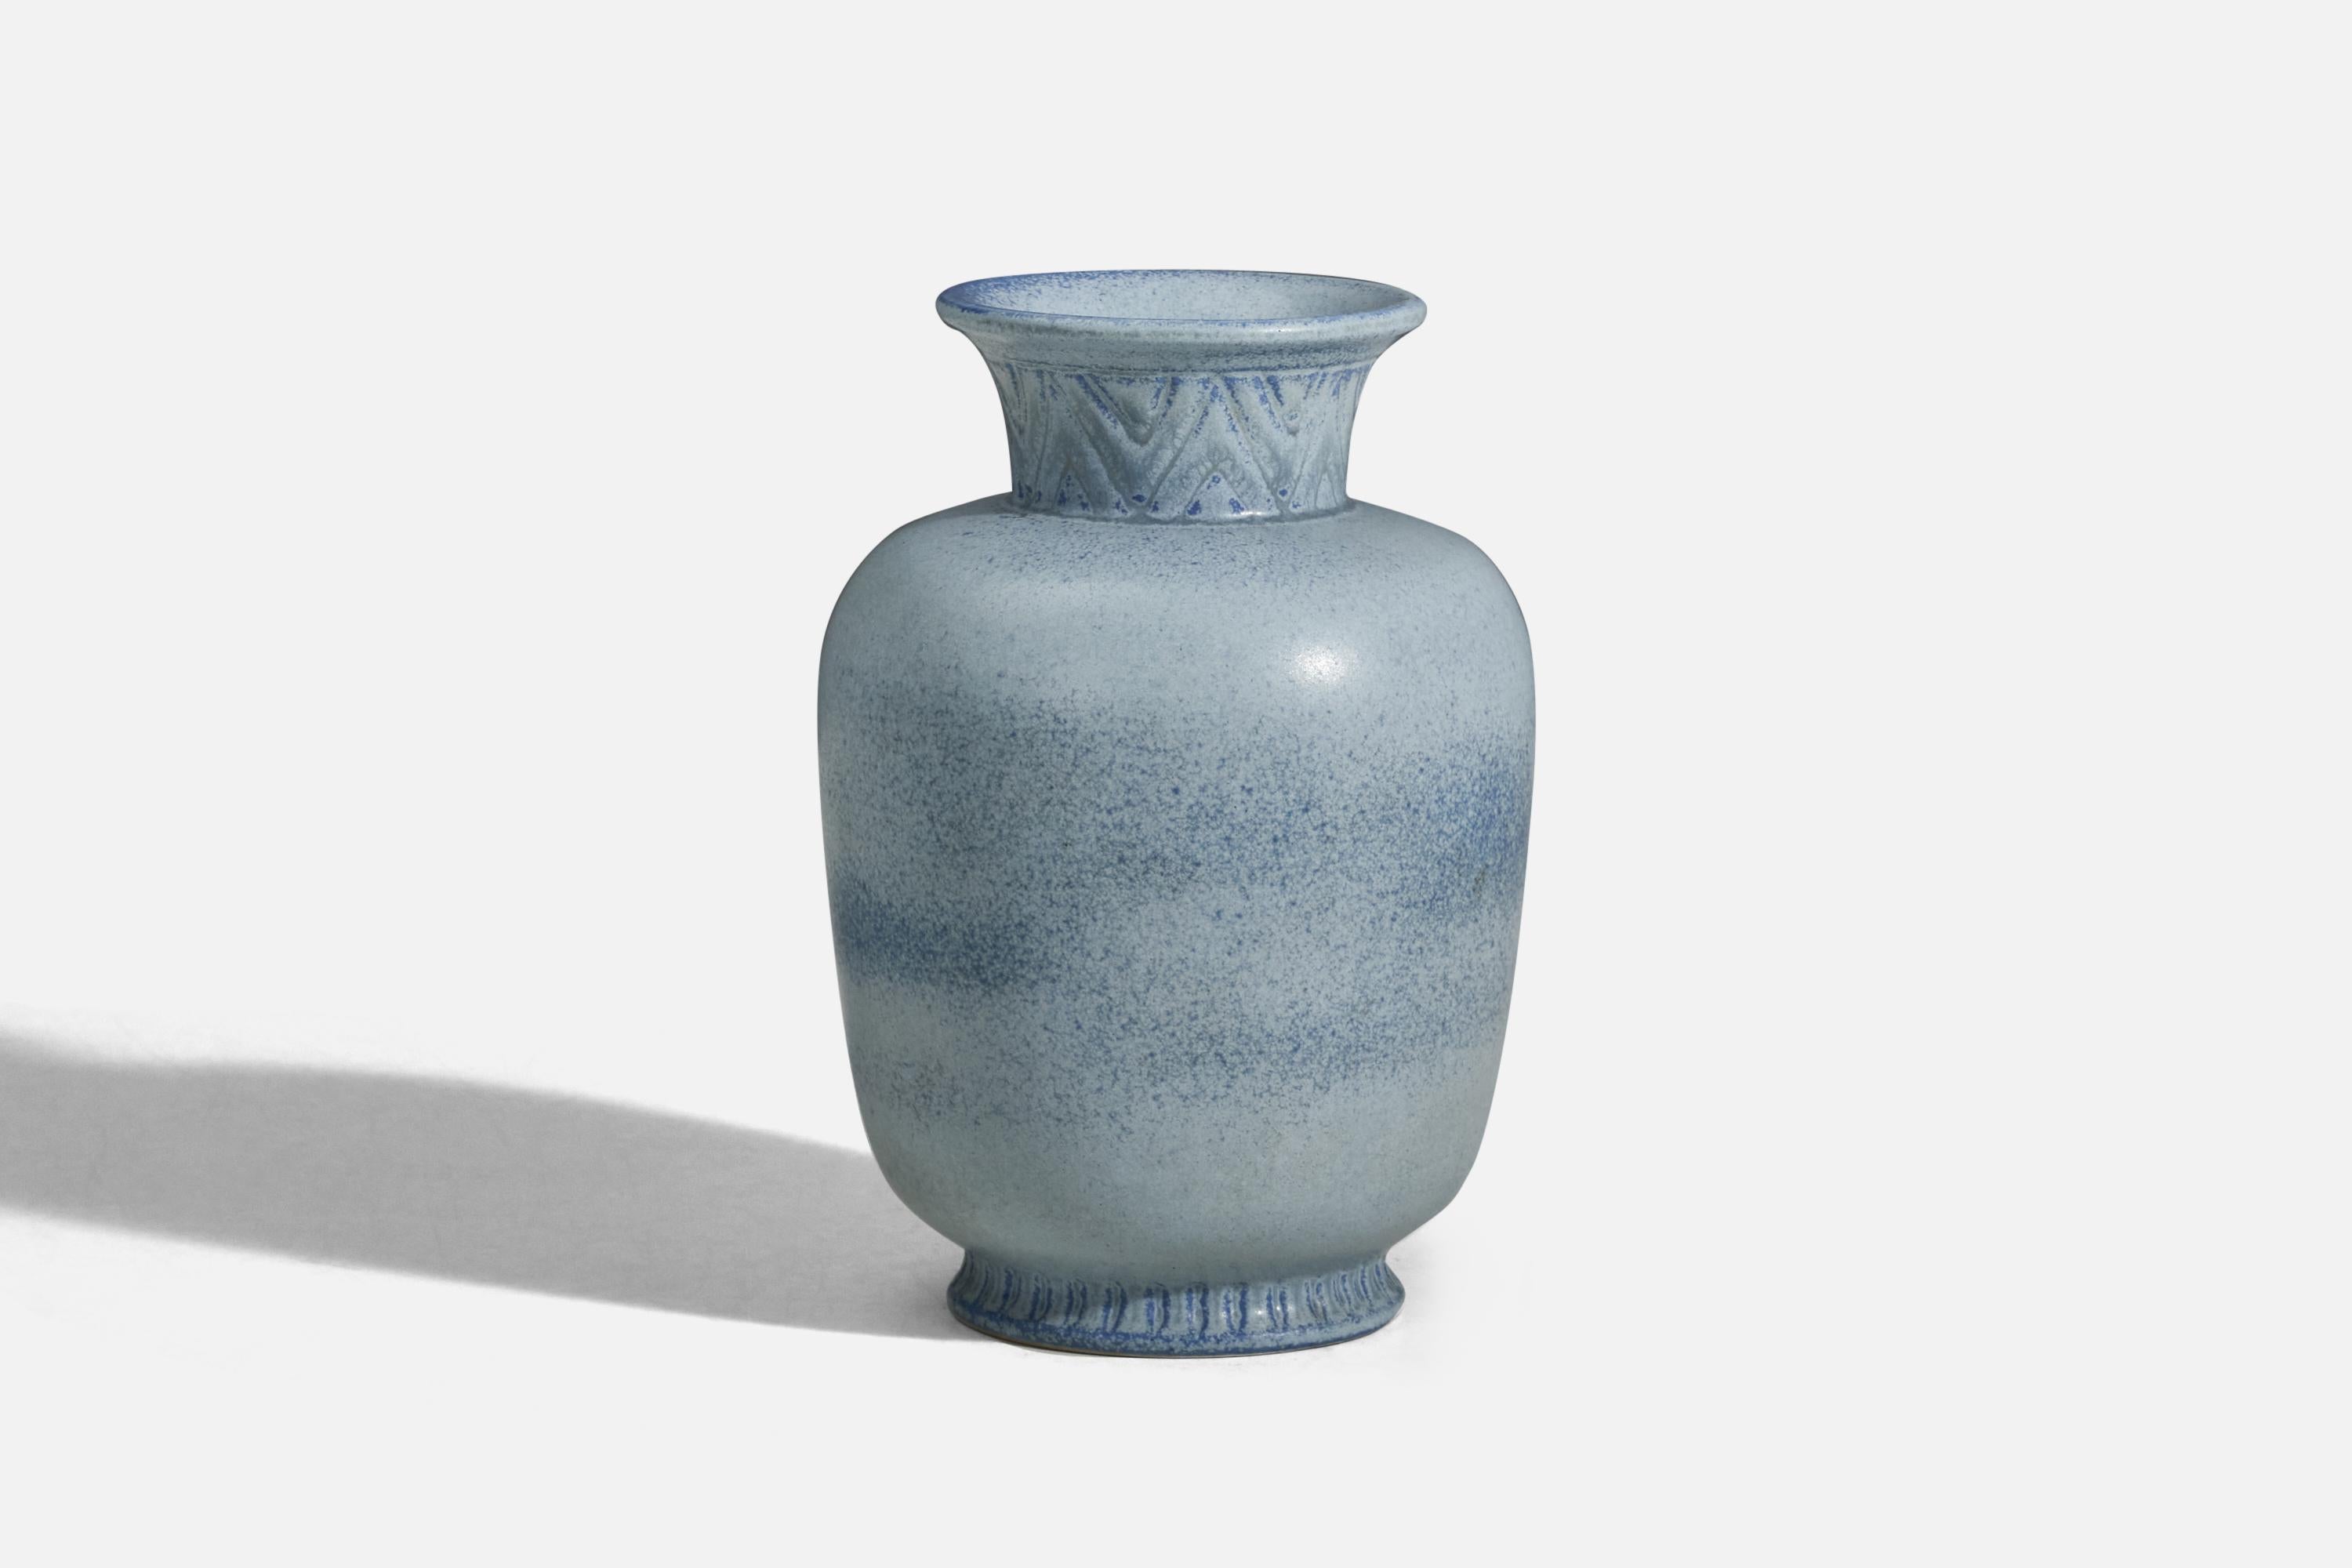 A light-blue glazed stoneware vase designed by Gunnar Nylund and produced by Rörstrand, Sweden, 1950s.